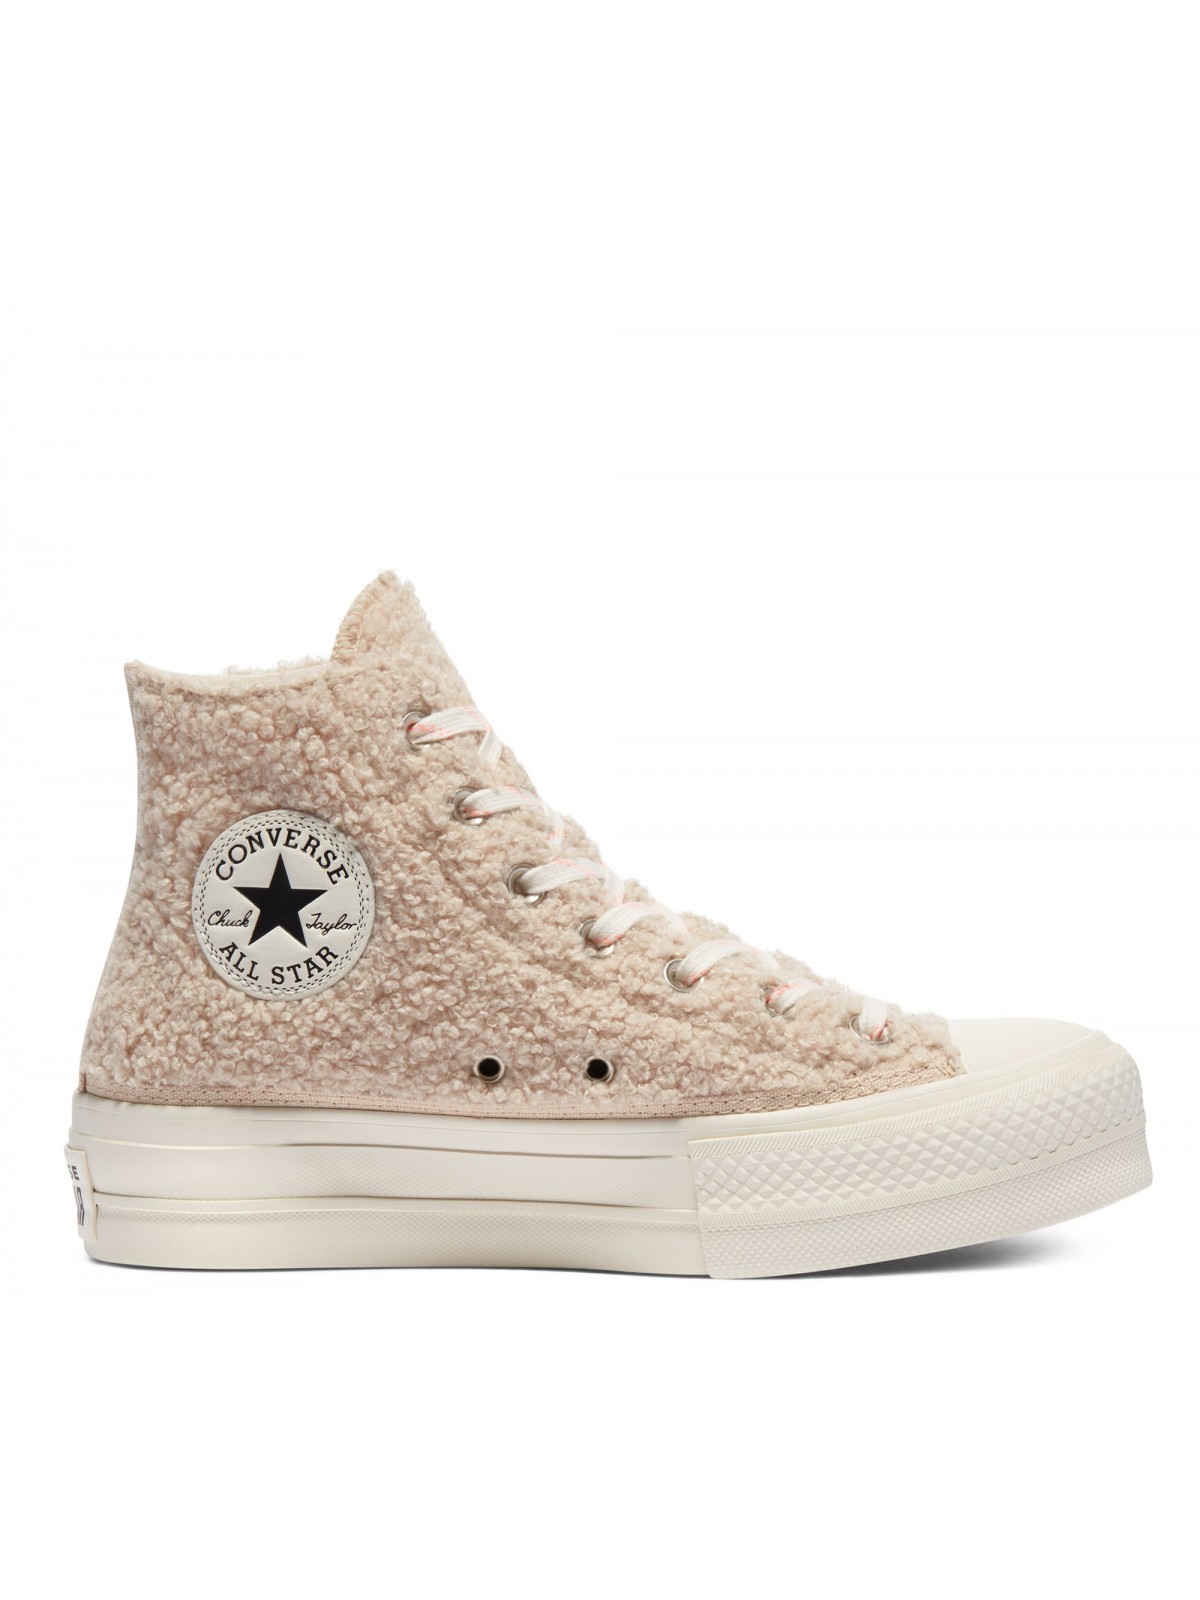 Converse Chuck Taylor all star Lift plateforme Sherpa beige